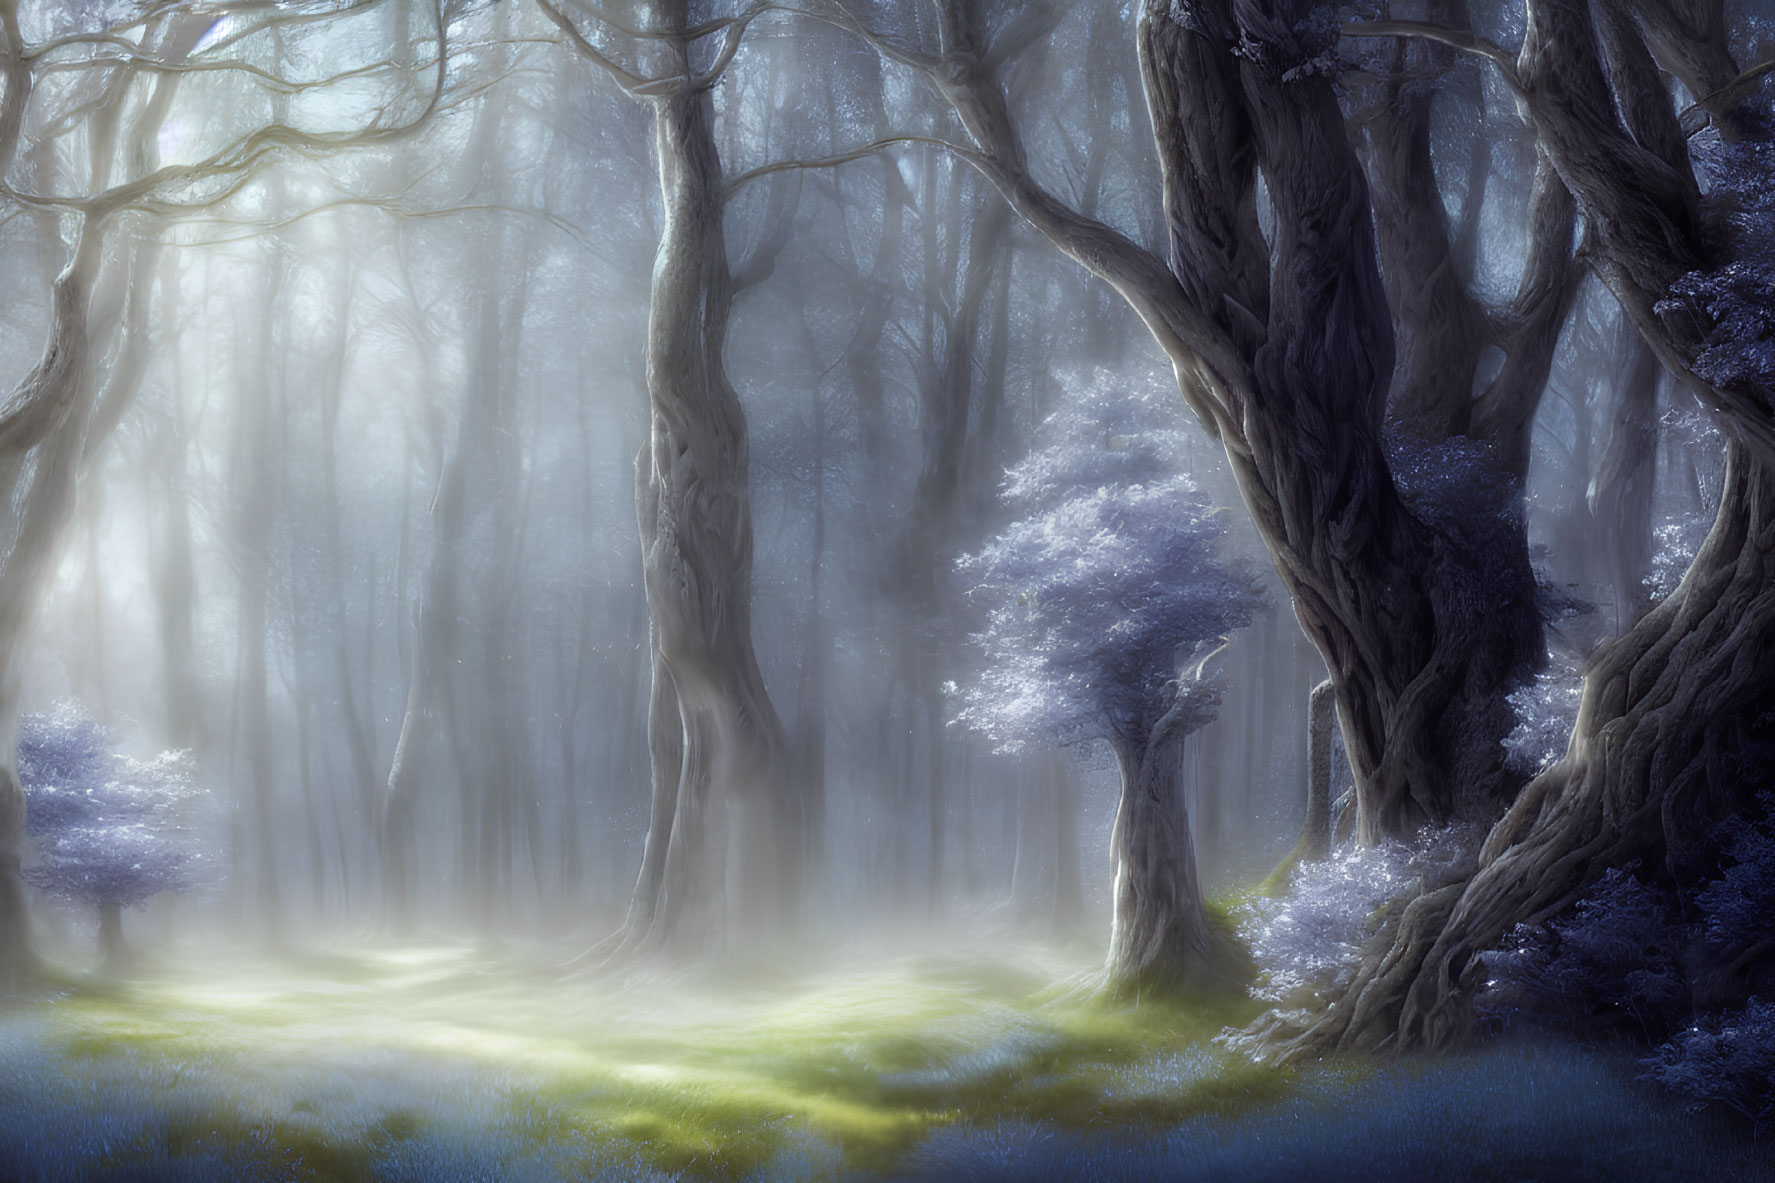 Mystical forest scene with twisted trees and purple foliage